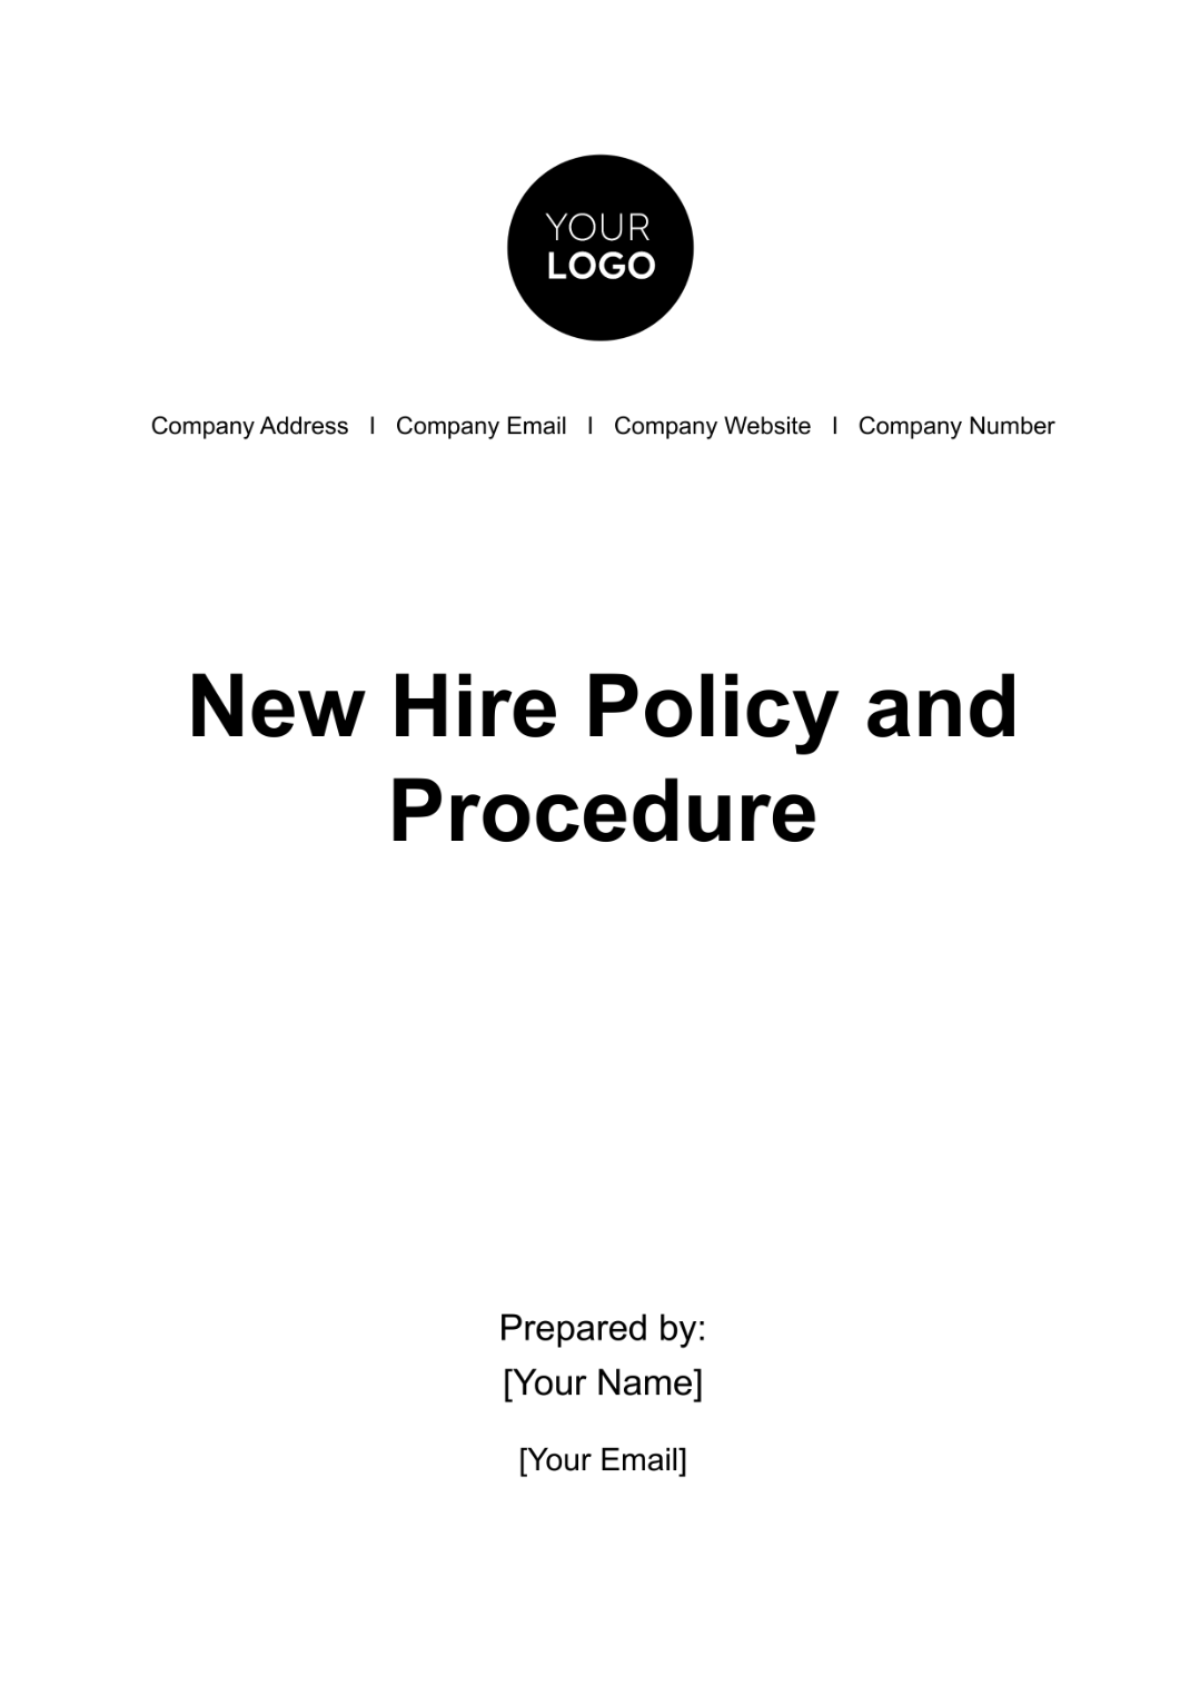 Free New Hire Policy & Procedure HR Template